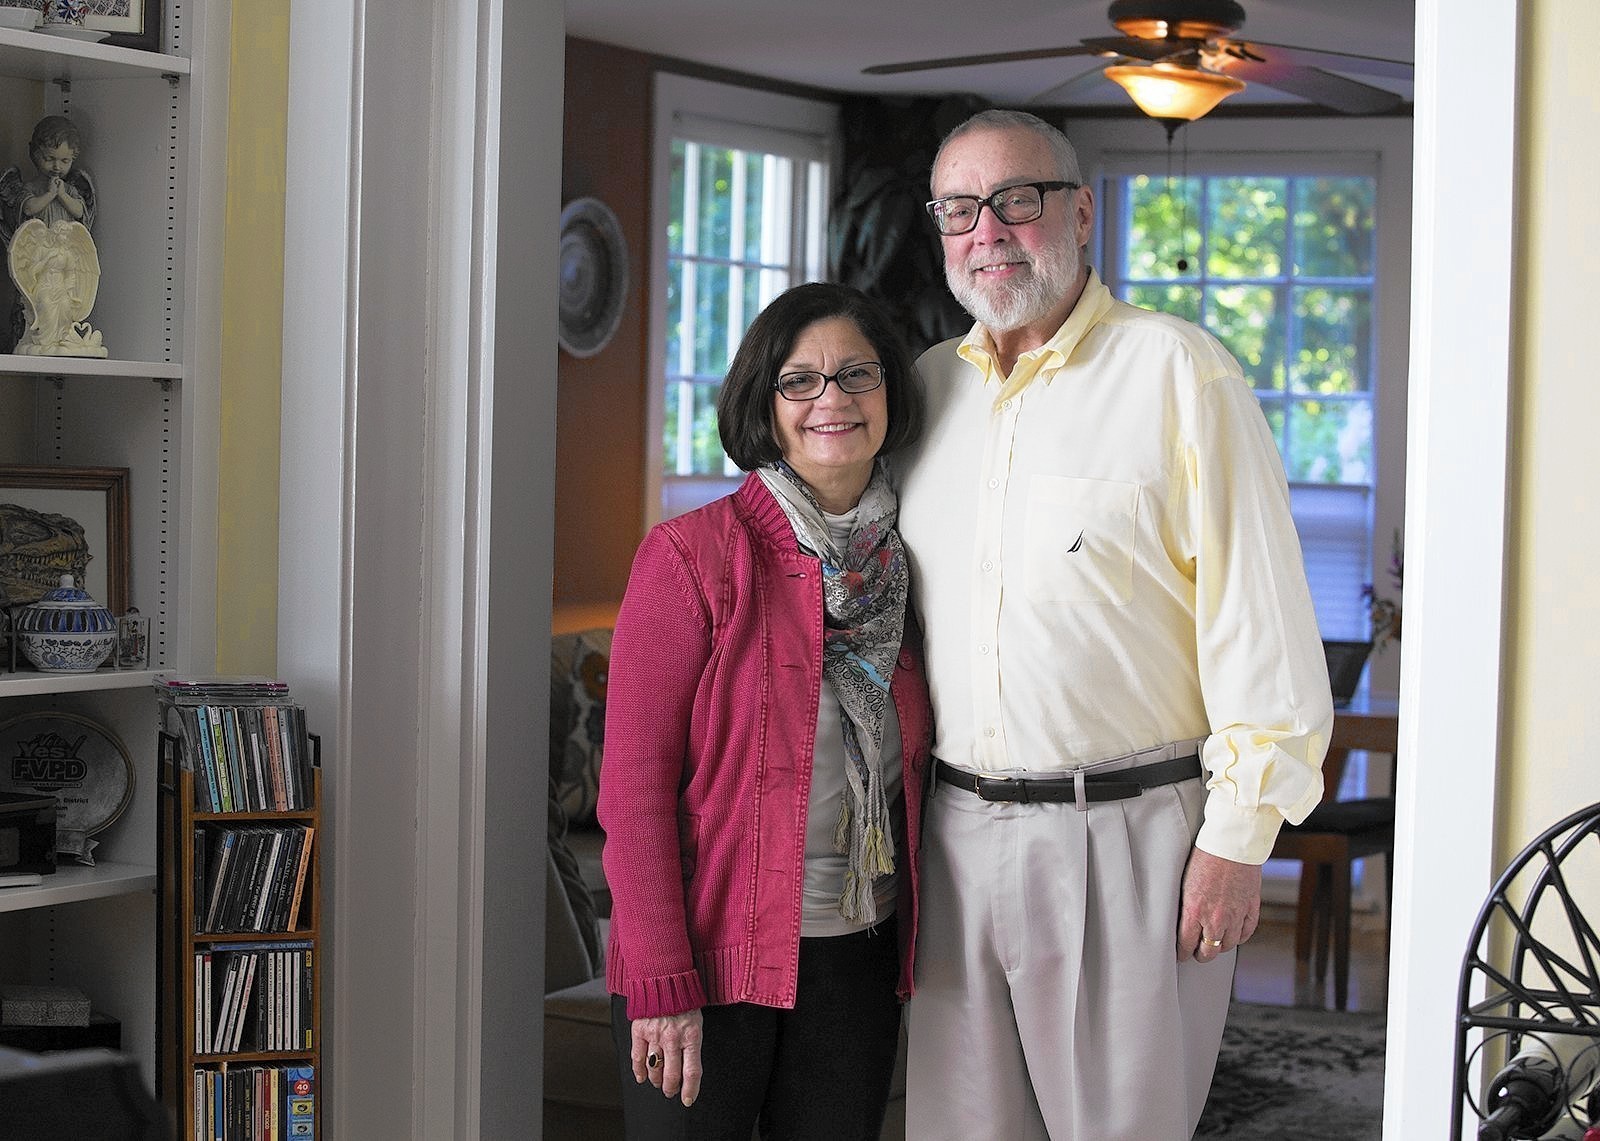 Mayor Weisner reflects on his time in office: 'I was 'blessed to be the guy... in the arena'